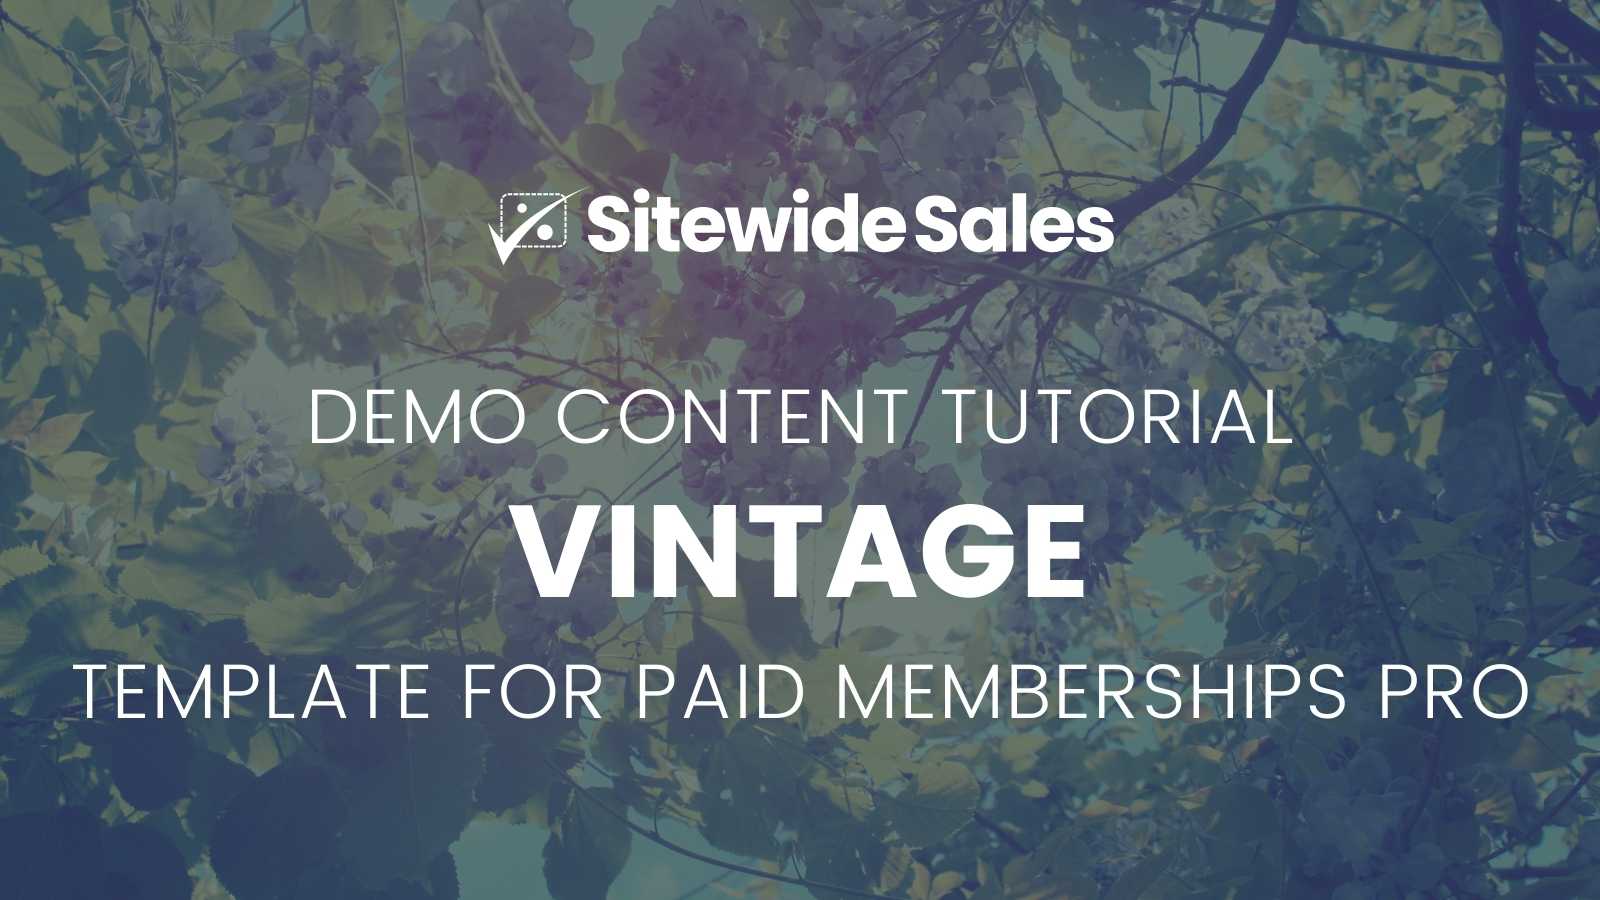 Vintage Template for Paid Memberships Pro: Sitewide Sale Demo Content